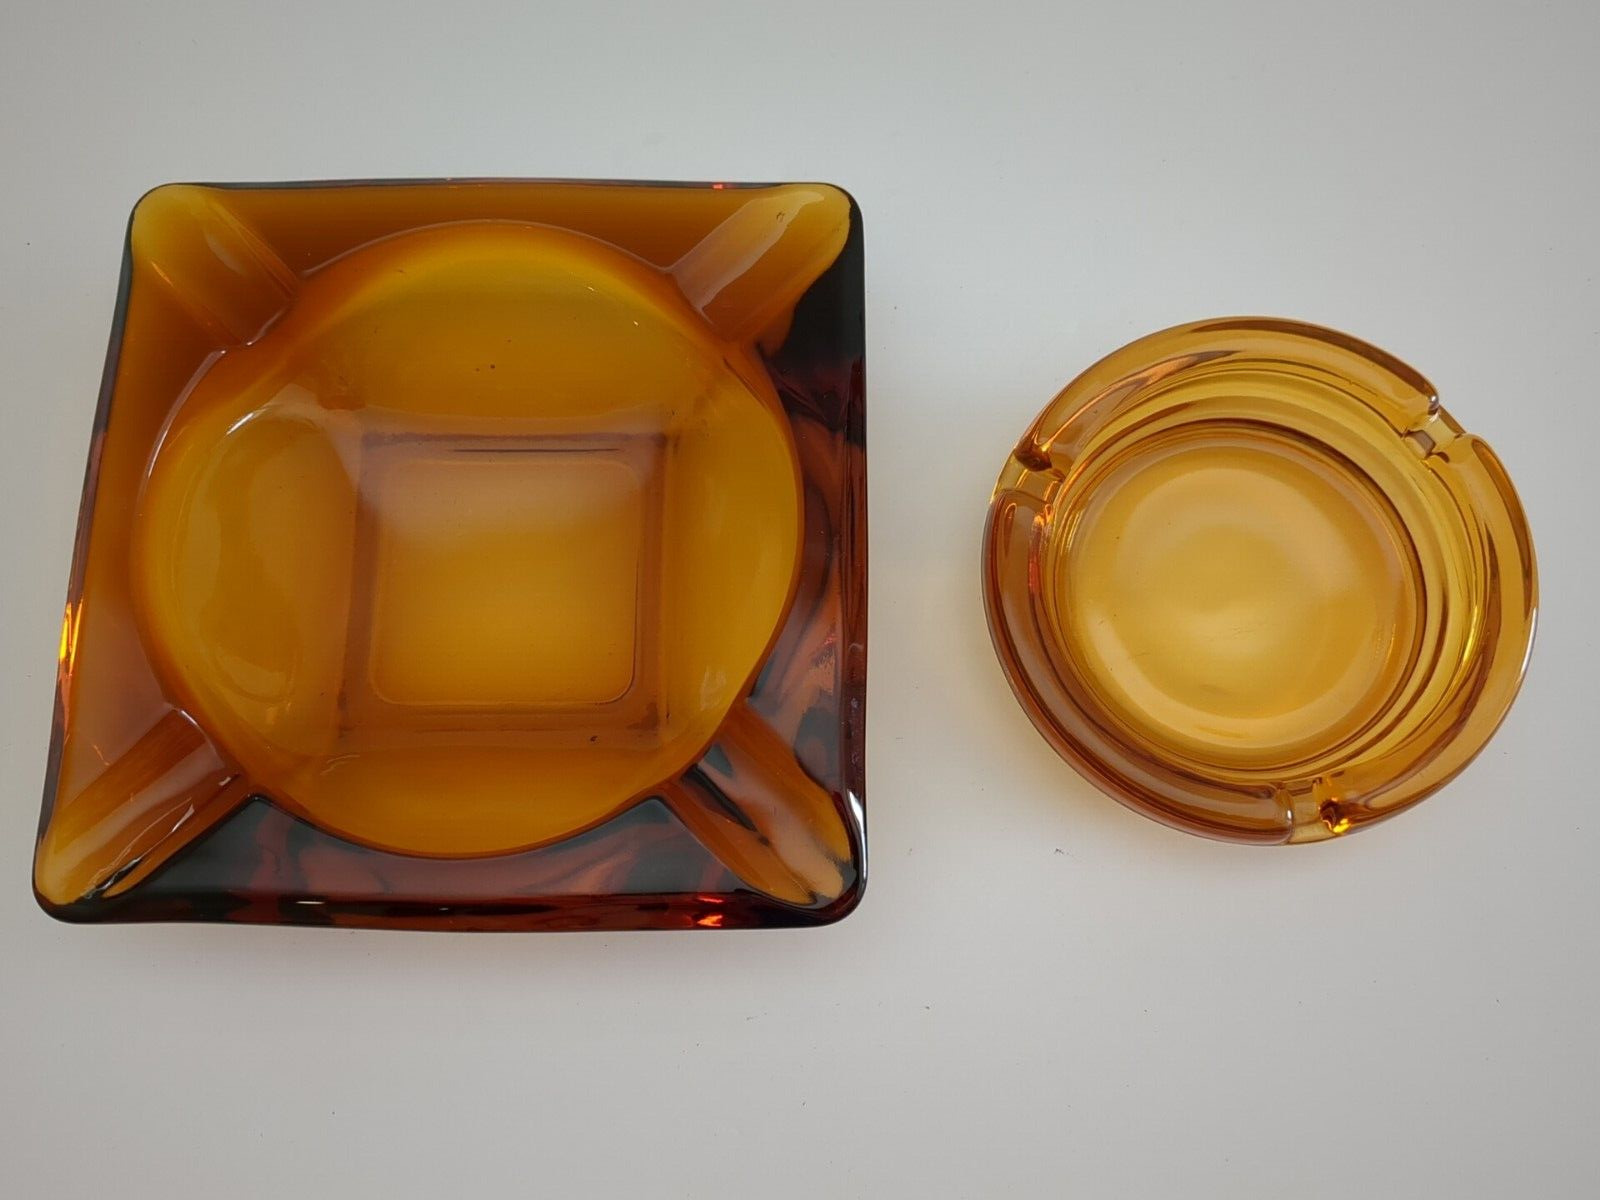 2 Vintage Amber Glass Square and Round Cigarette Ashtray - Mid-Century Modern